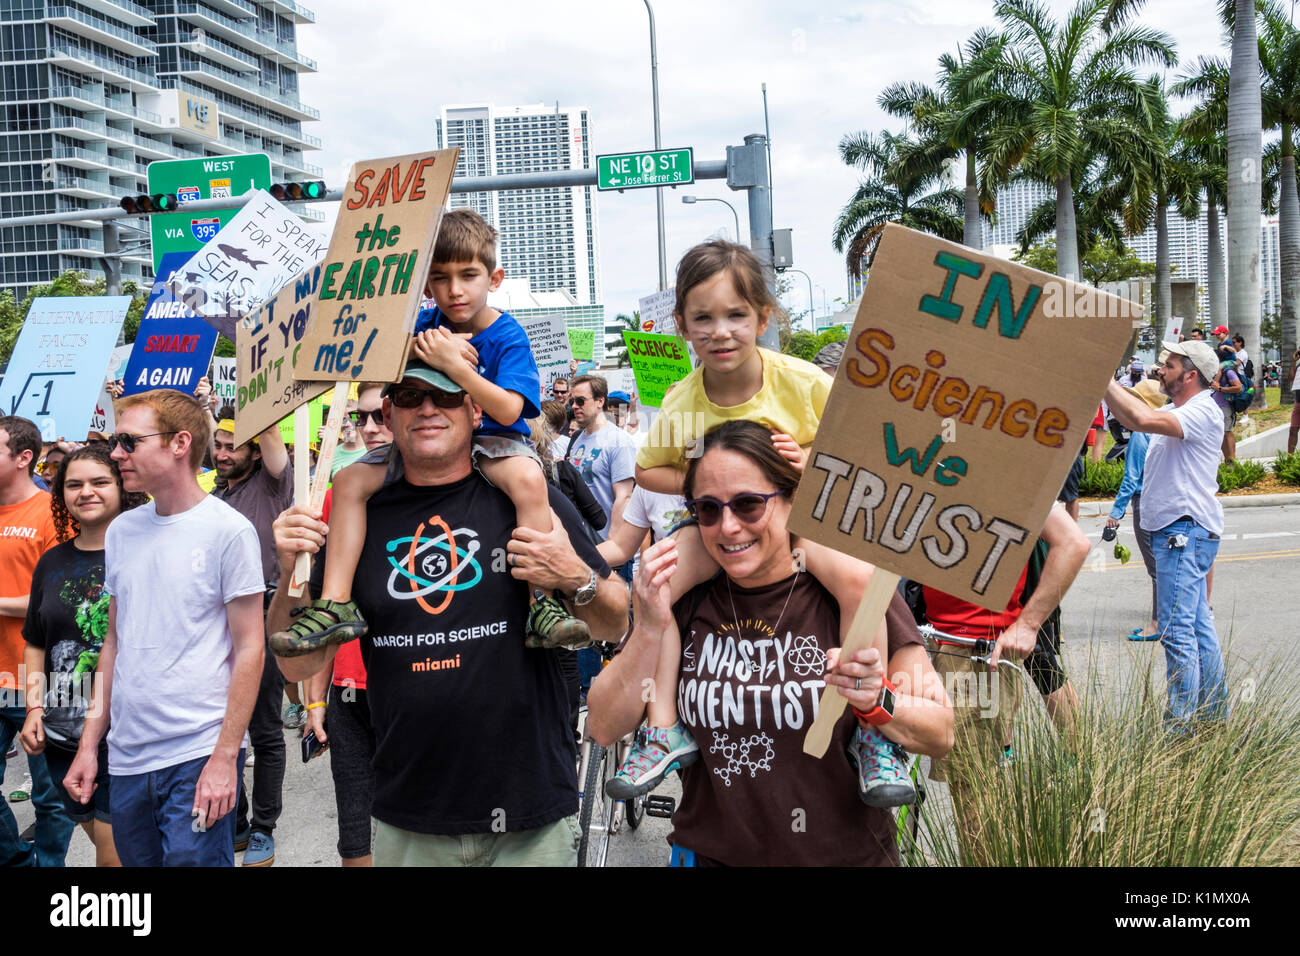 Miami Florida,Museum Park,March for Science,protest,rally,sign,protester,marching,signs,posters,family families parent parents child children,boy boys Stock Photo